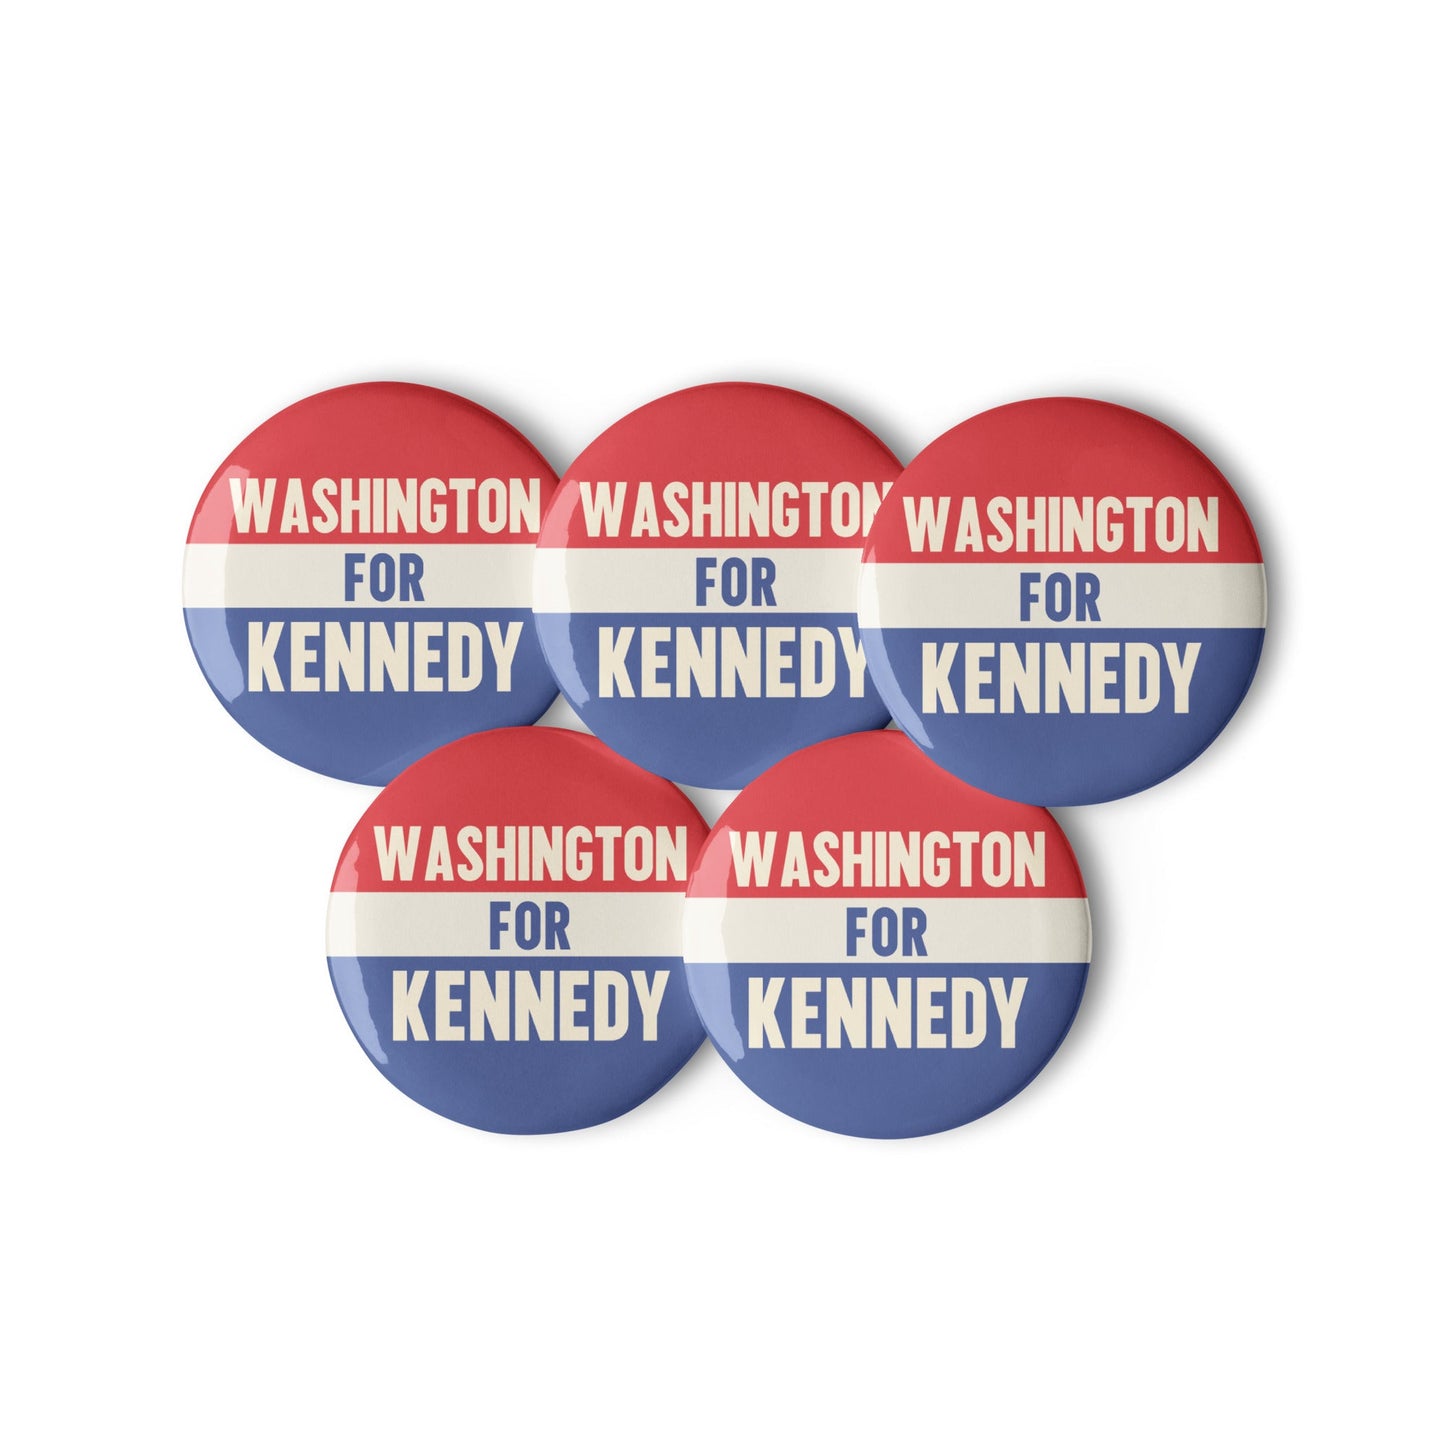 Washington for Kennedy (5 Buttons) - TEAM KENNEDY. All rights reserved